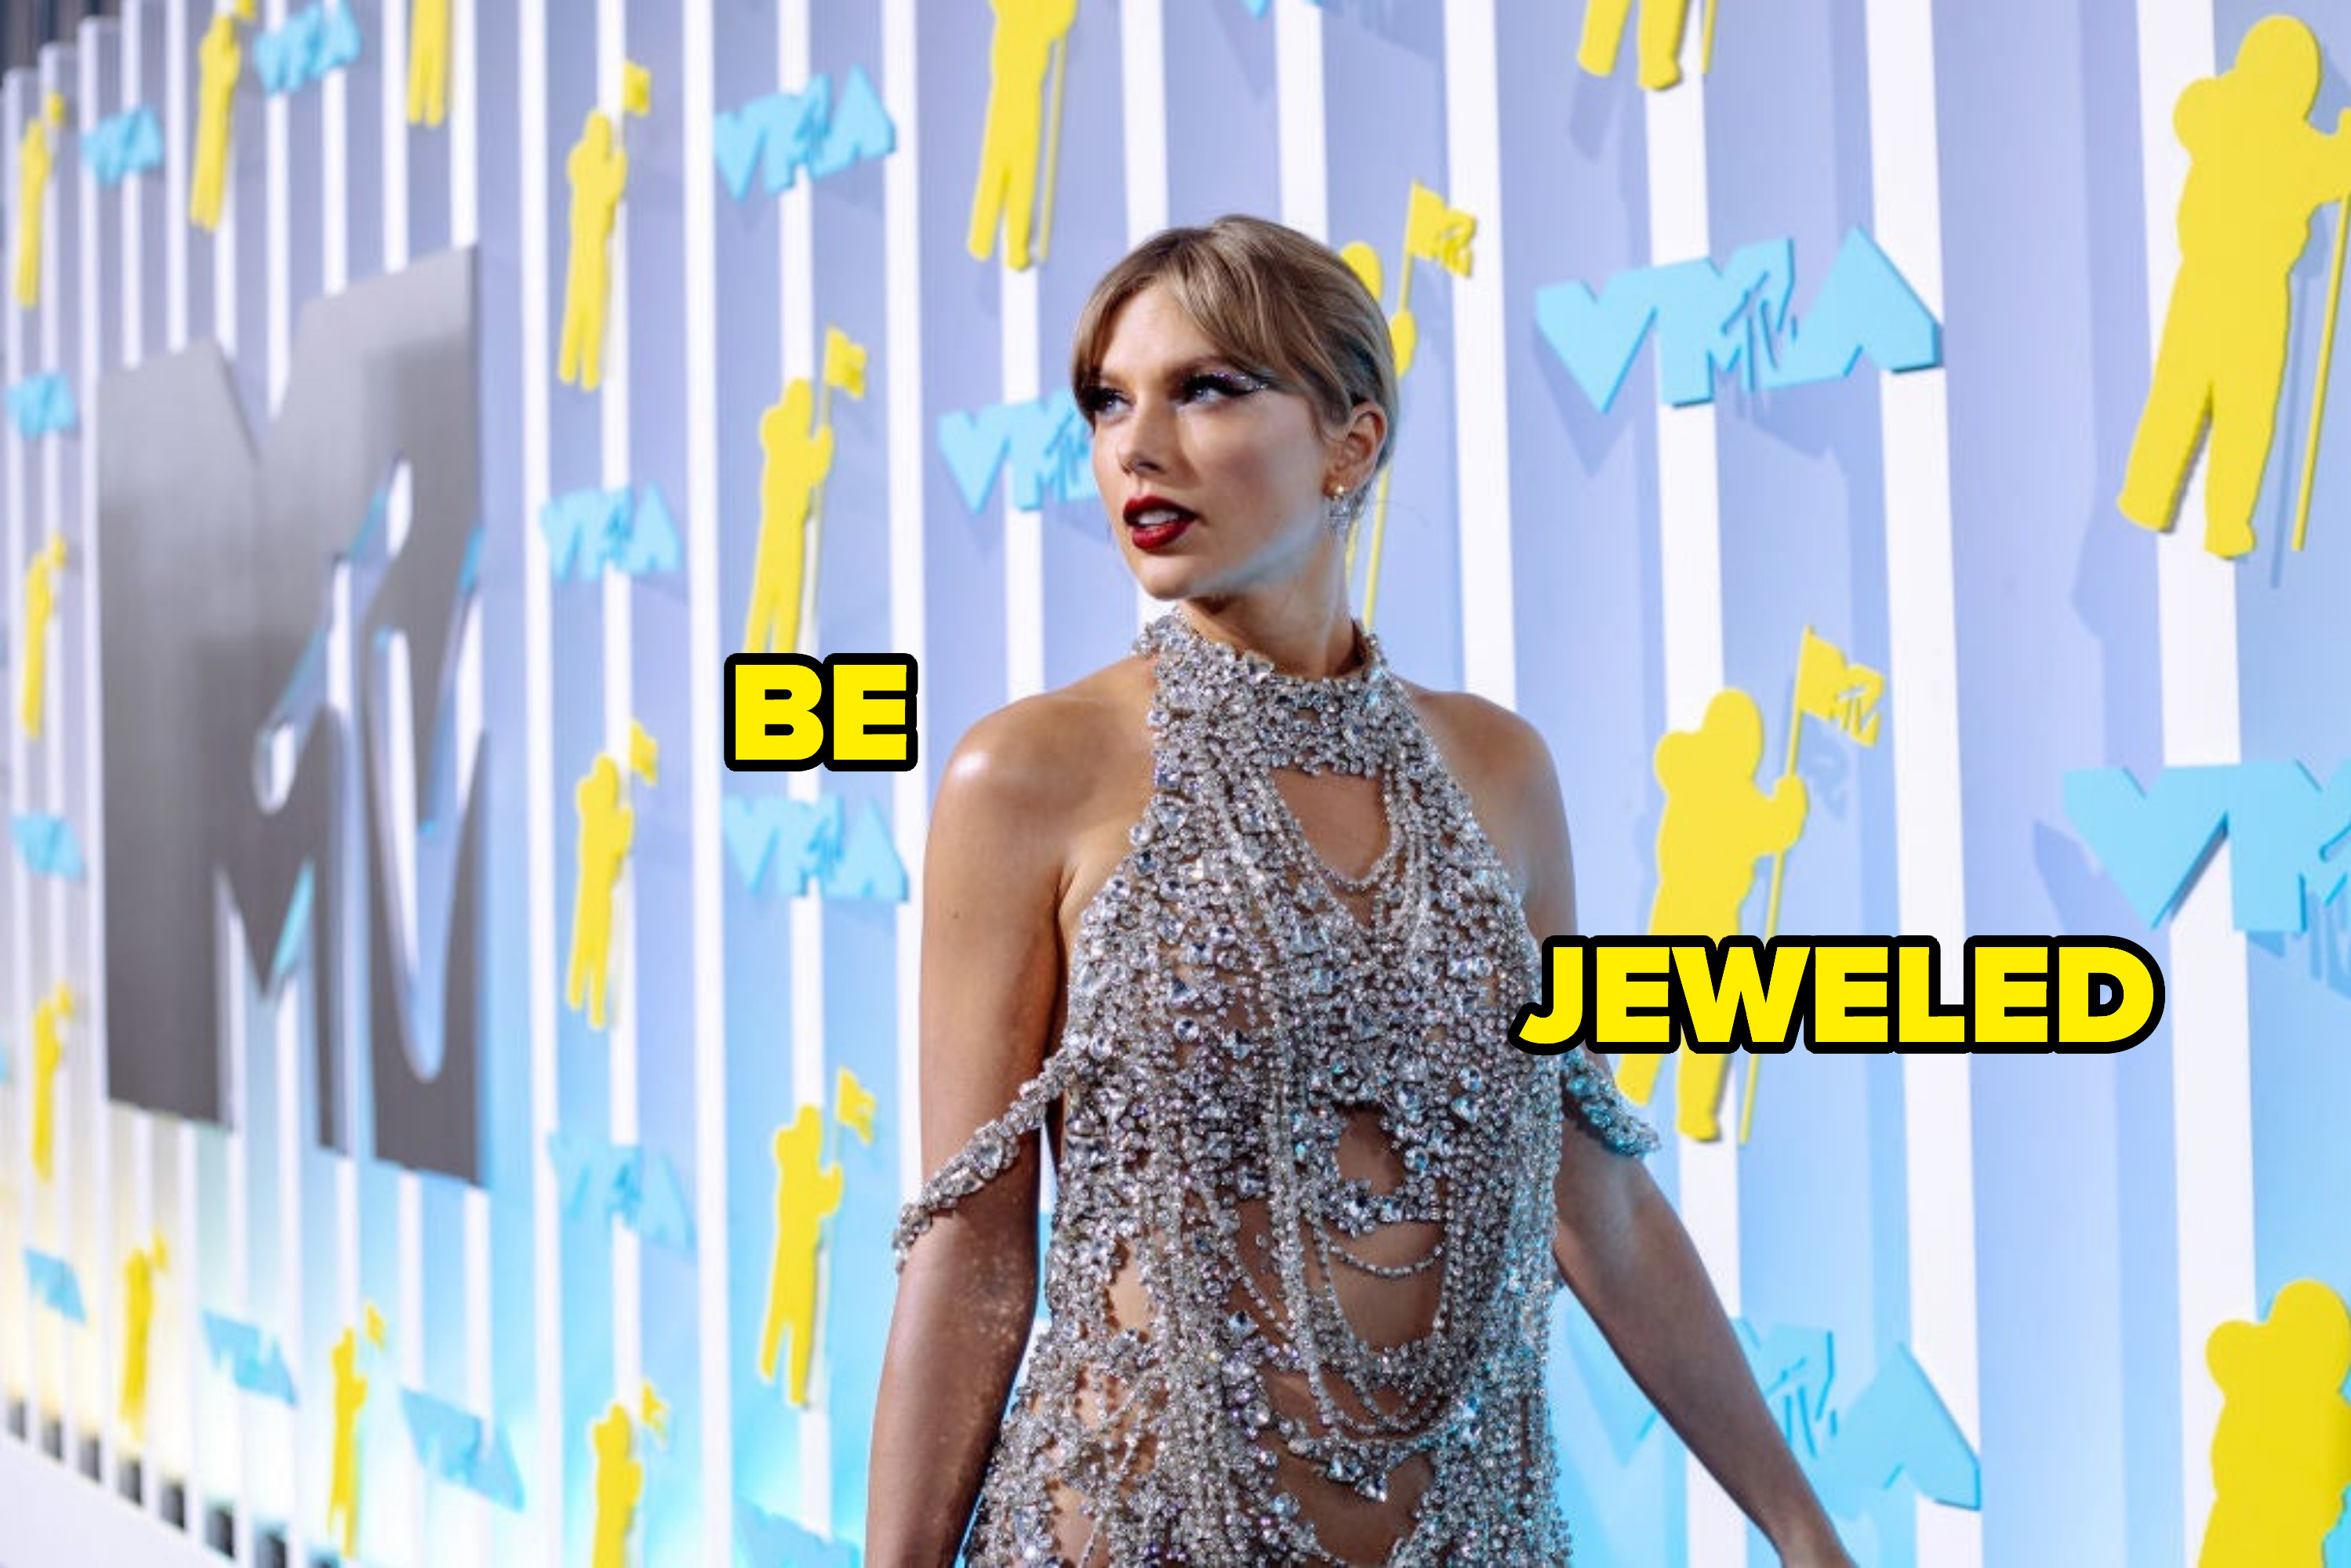 Taylor wearing a bejeweled halter dress on the red carpet